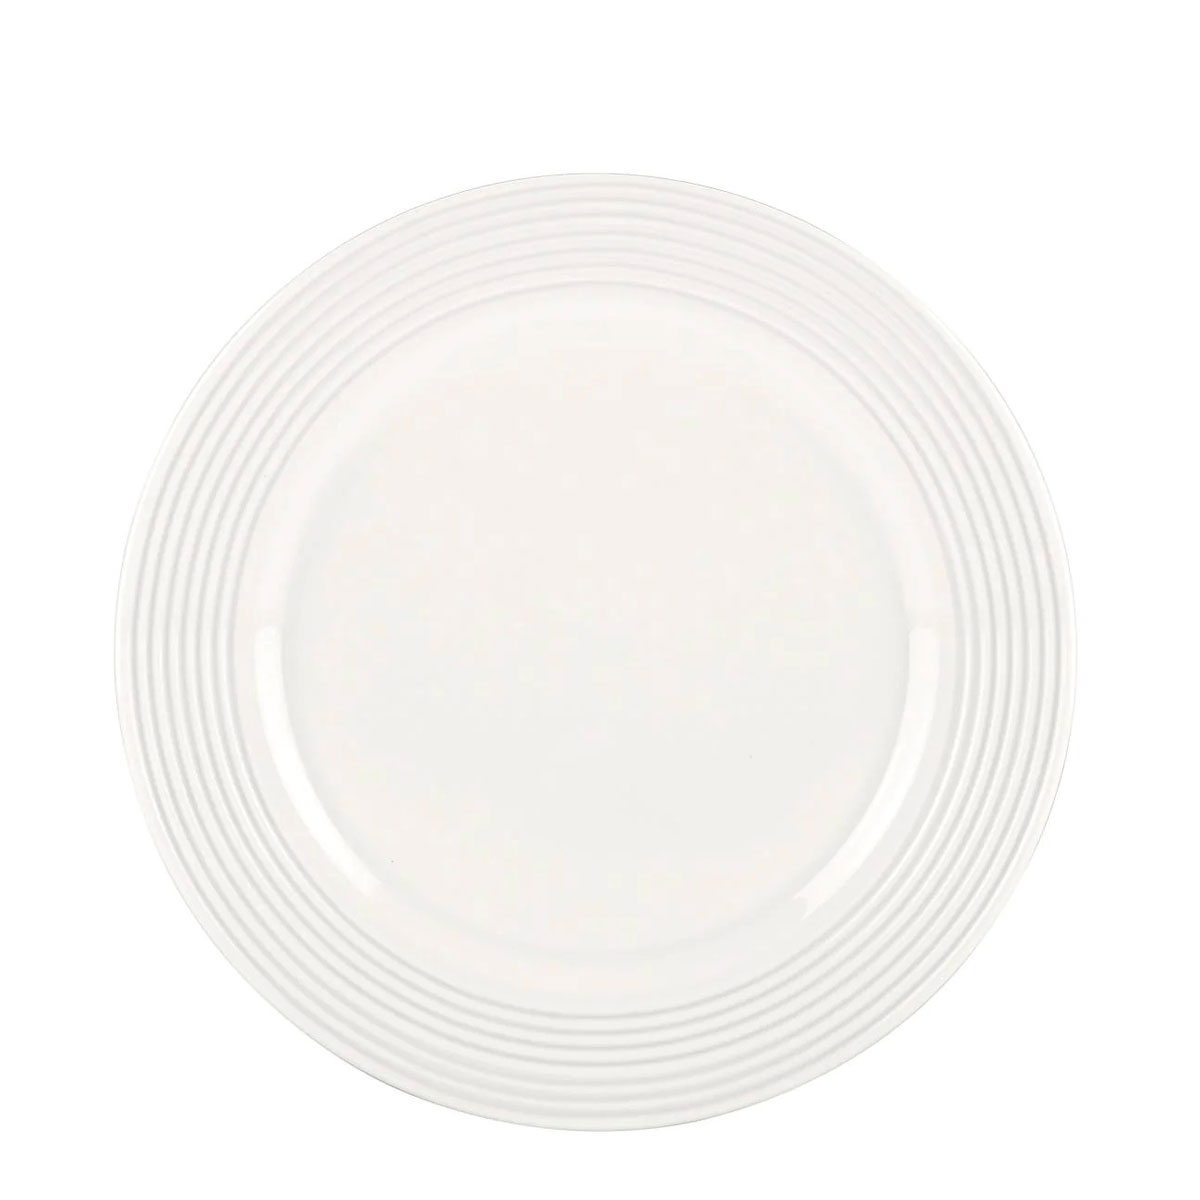 Lenox Tin Can Alley Accent Plate - 7 Degree